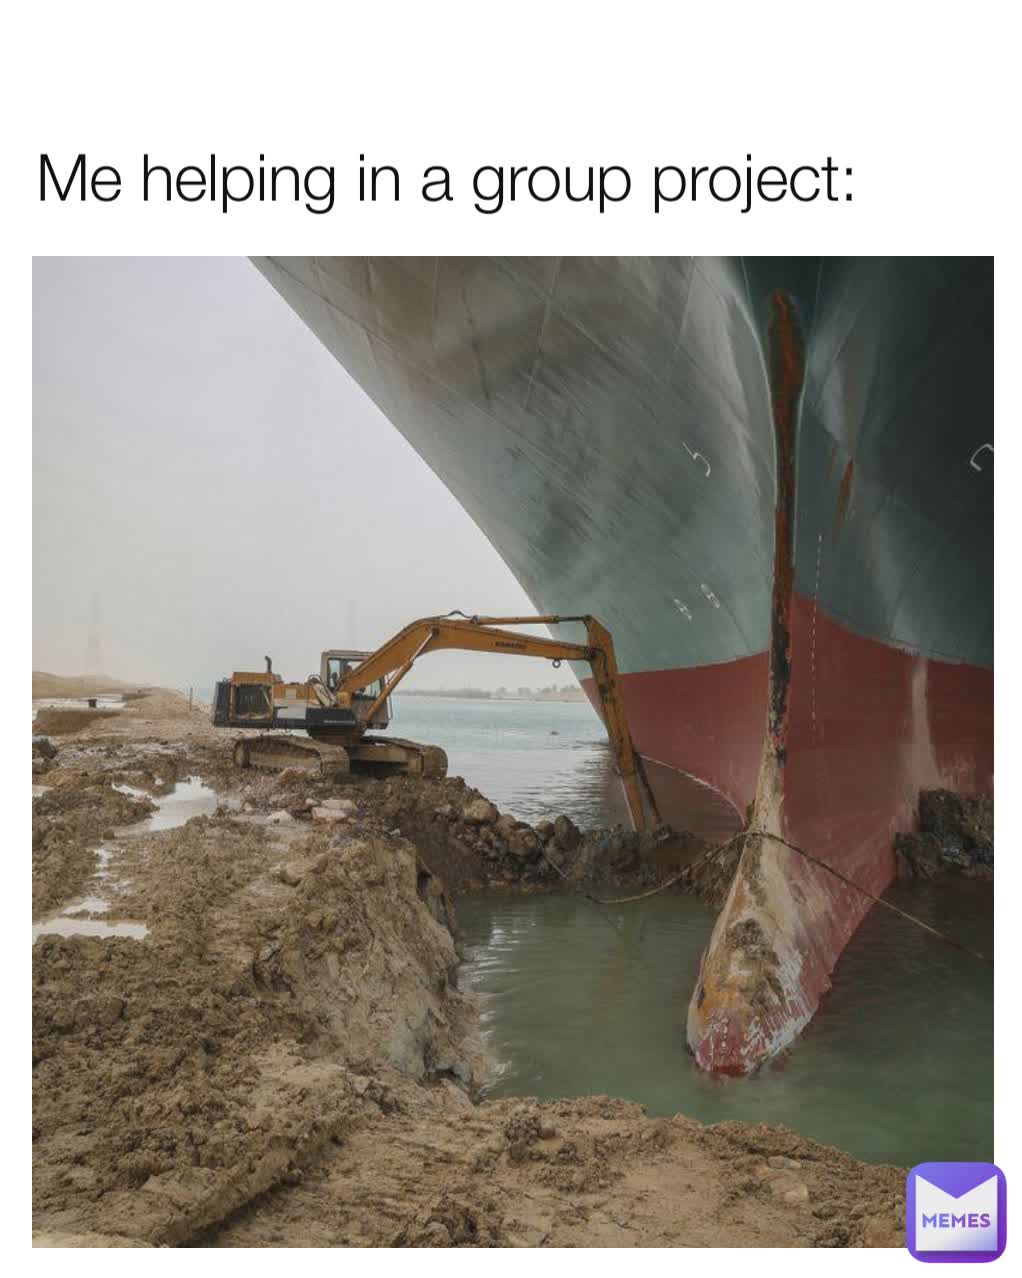 Me helping in a group project: